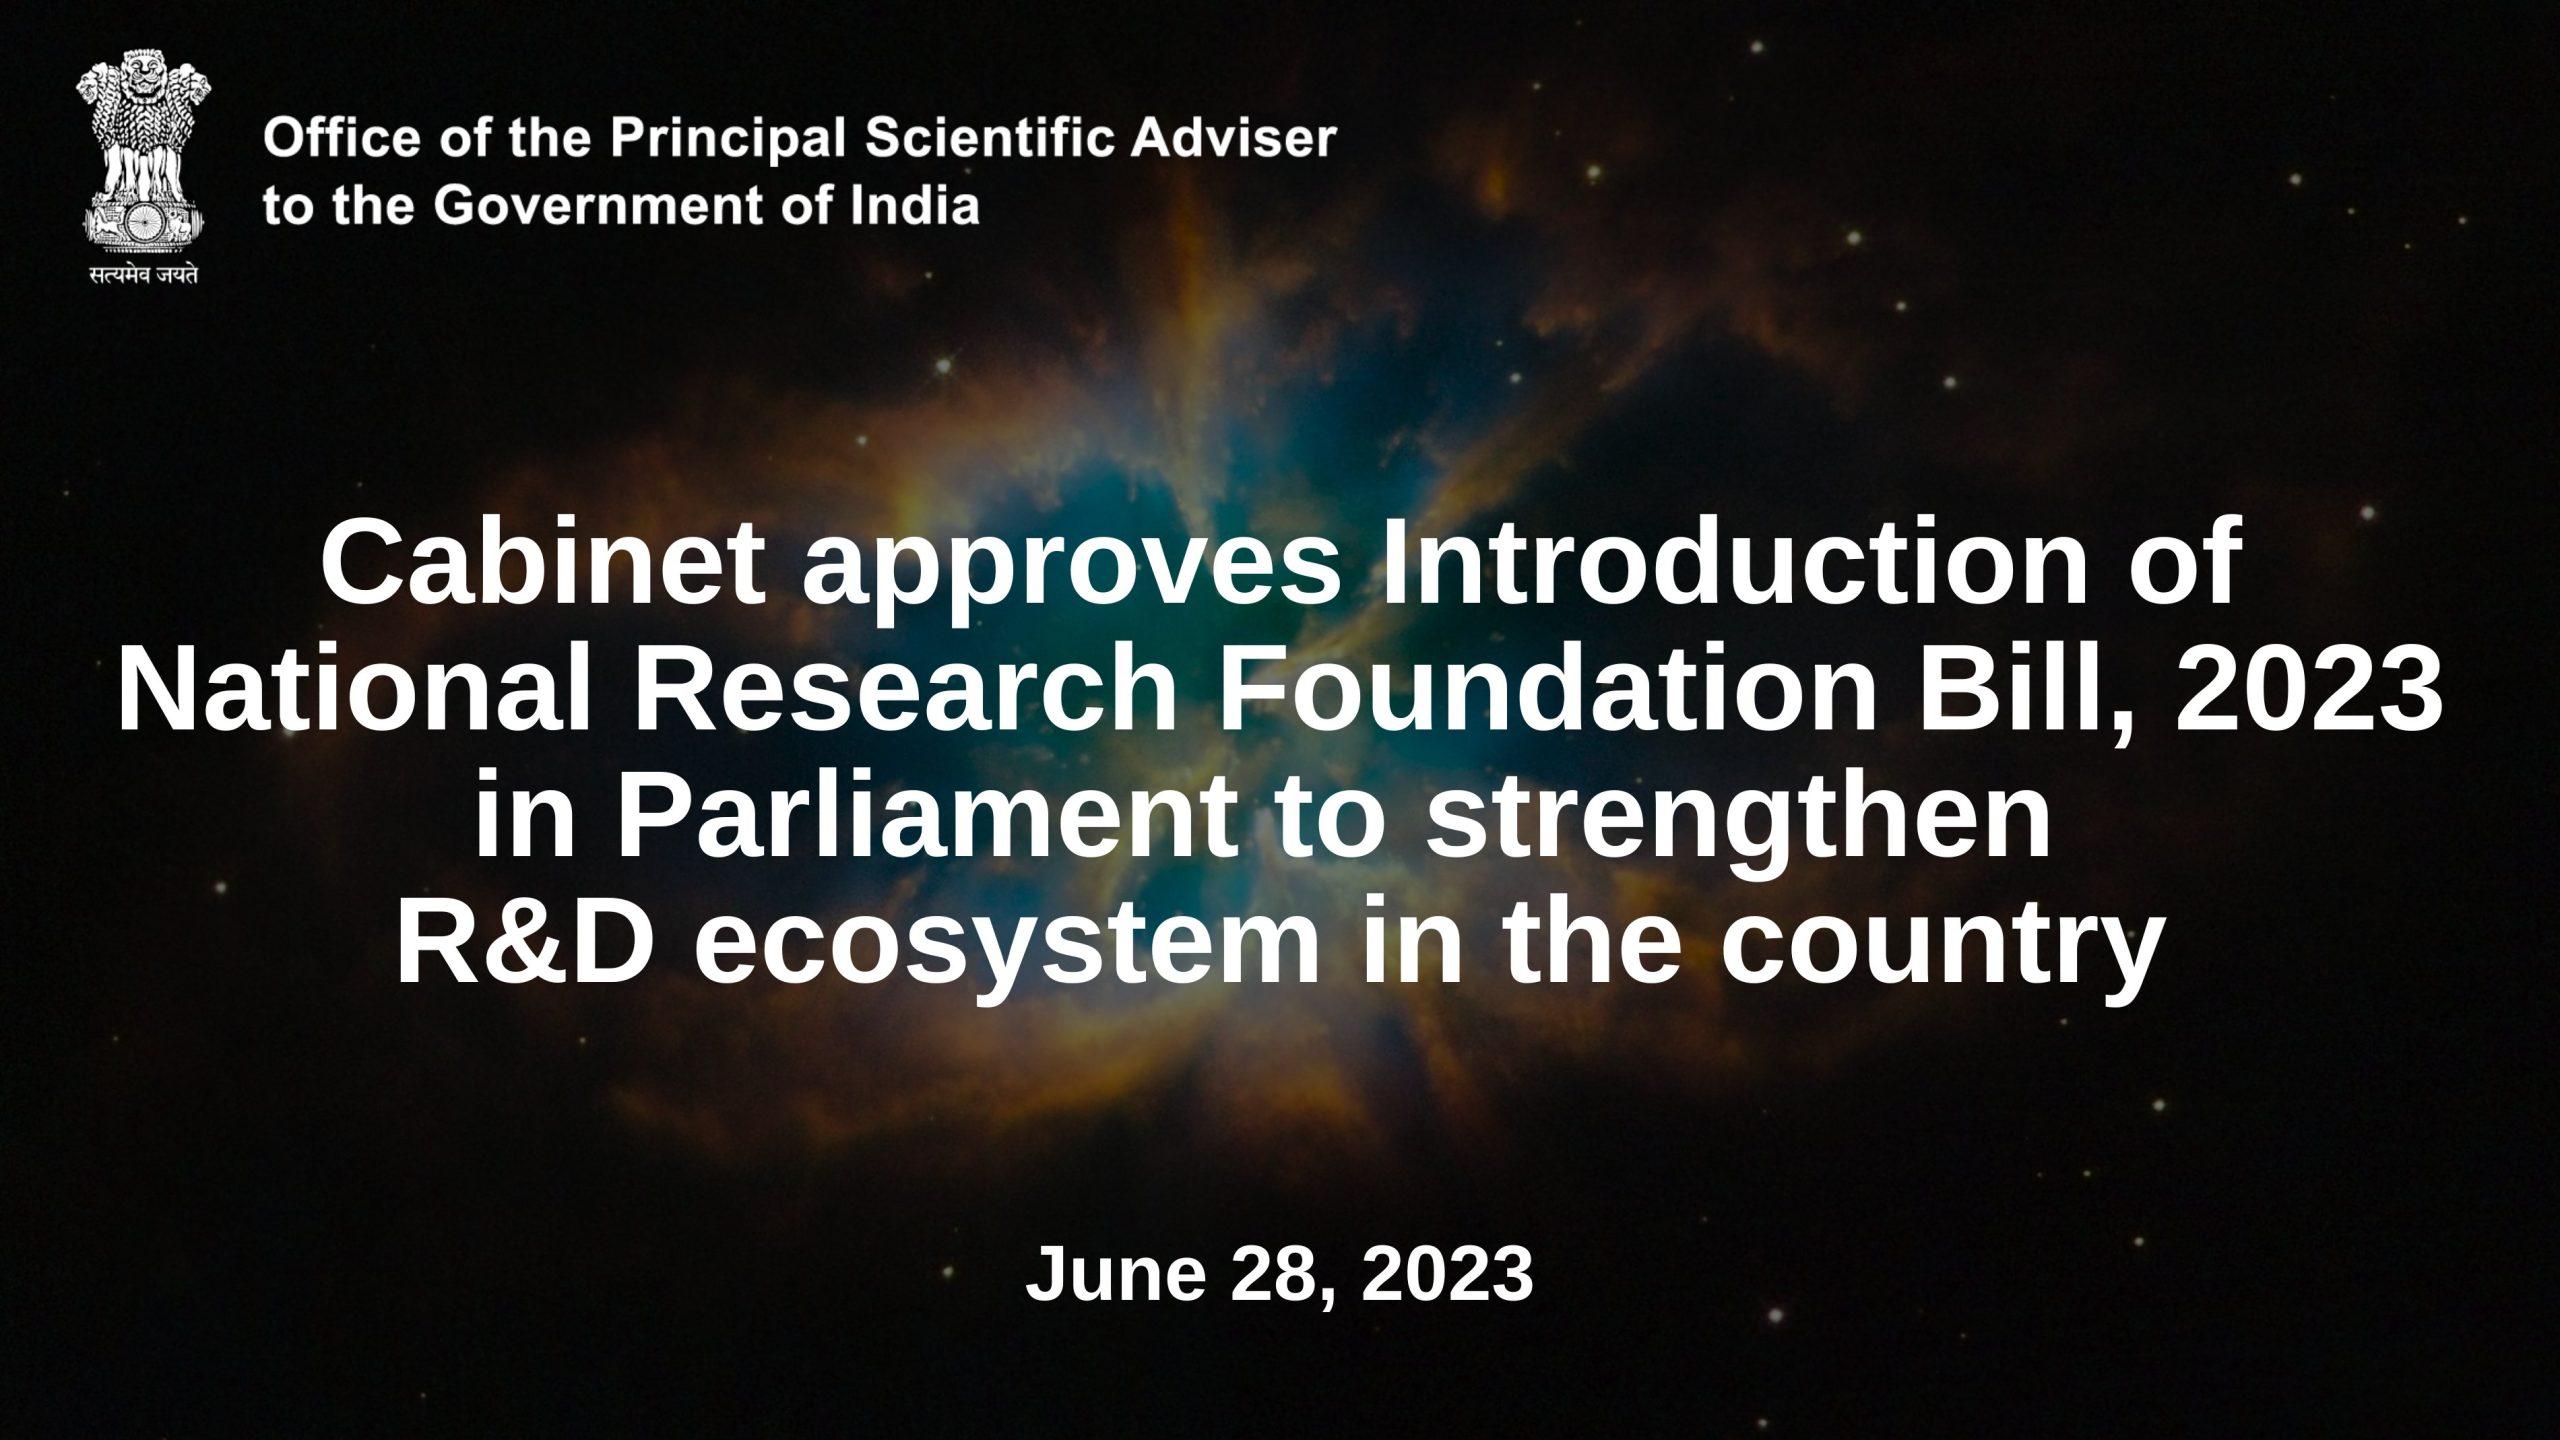 Cabinet Approves National Research Foundation Bill, 2023 to Strengthen Research Eco-system in India